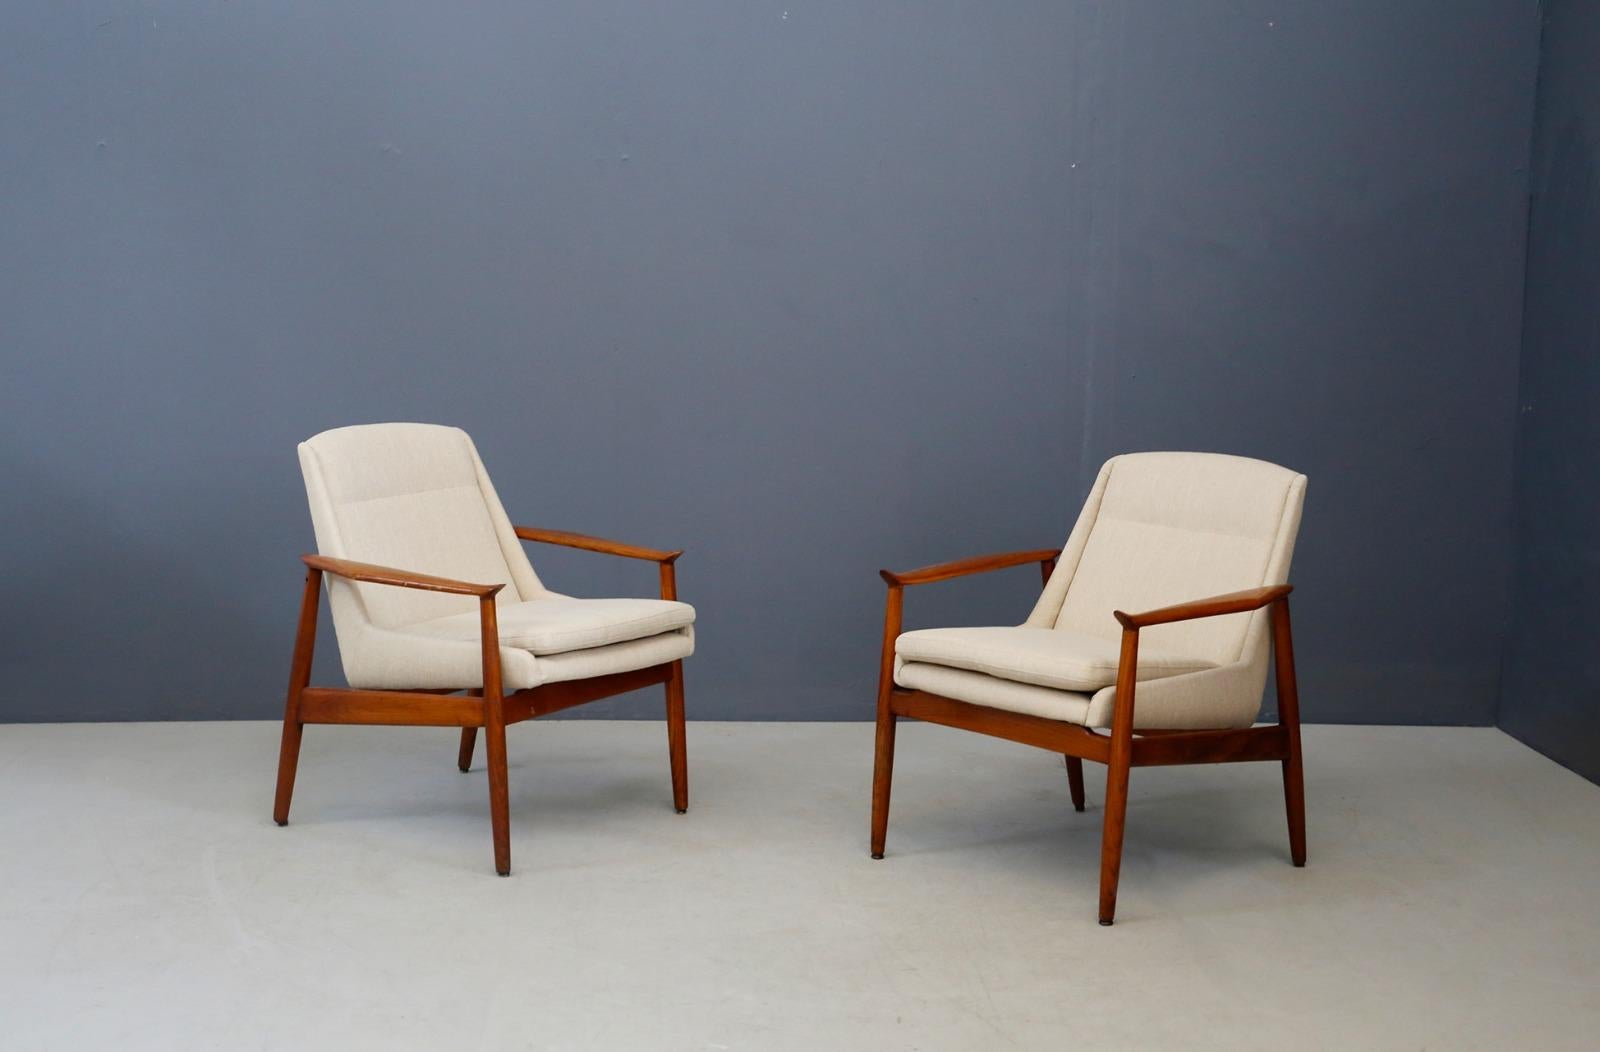 Beautiful pair of wooden Swedish armchairs from 1950.
The Swedish armchairs have a durable wooden frame, the back and seat have been restored, then reupholstered with fine Italian cotton in beige color.
This beautiful pair of Swedish armchairs is